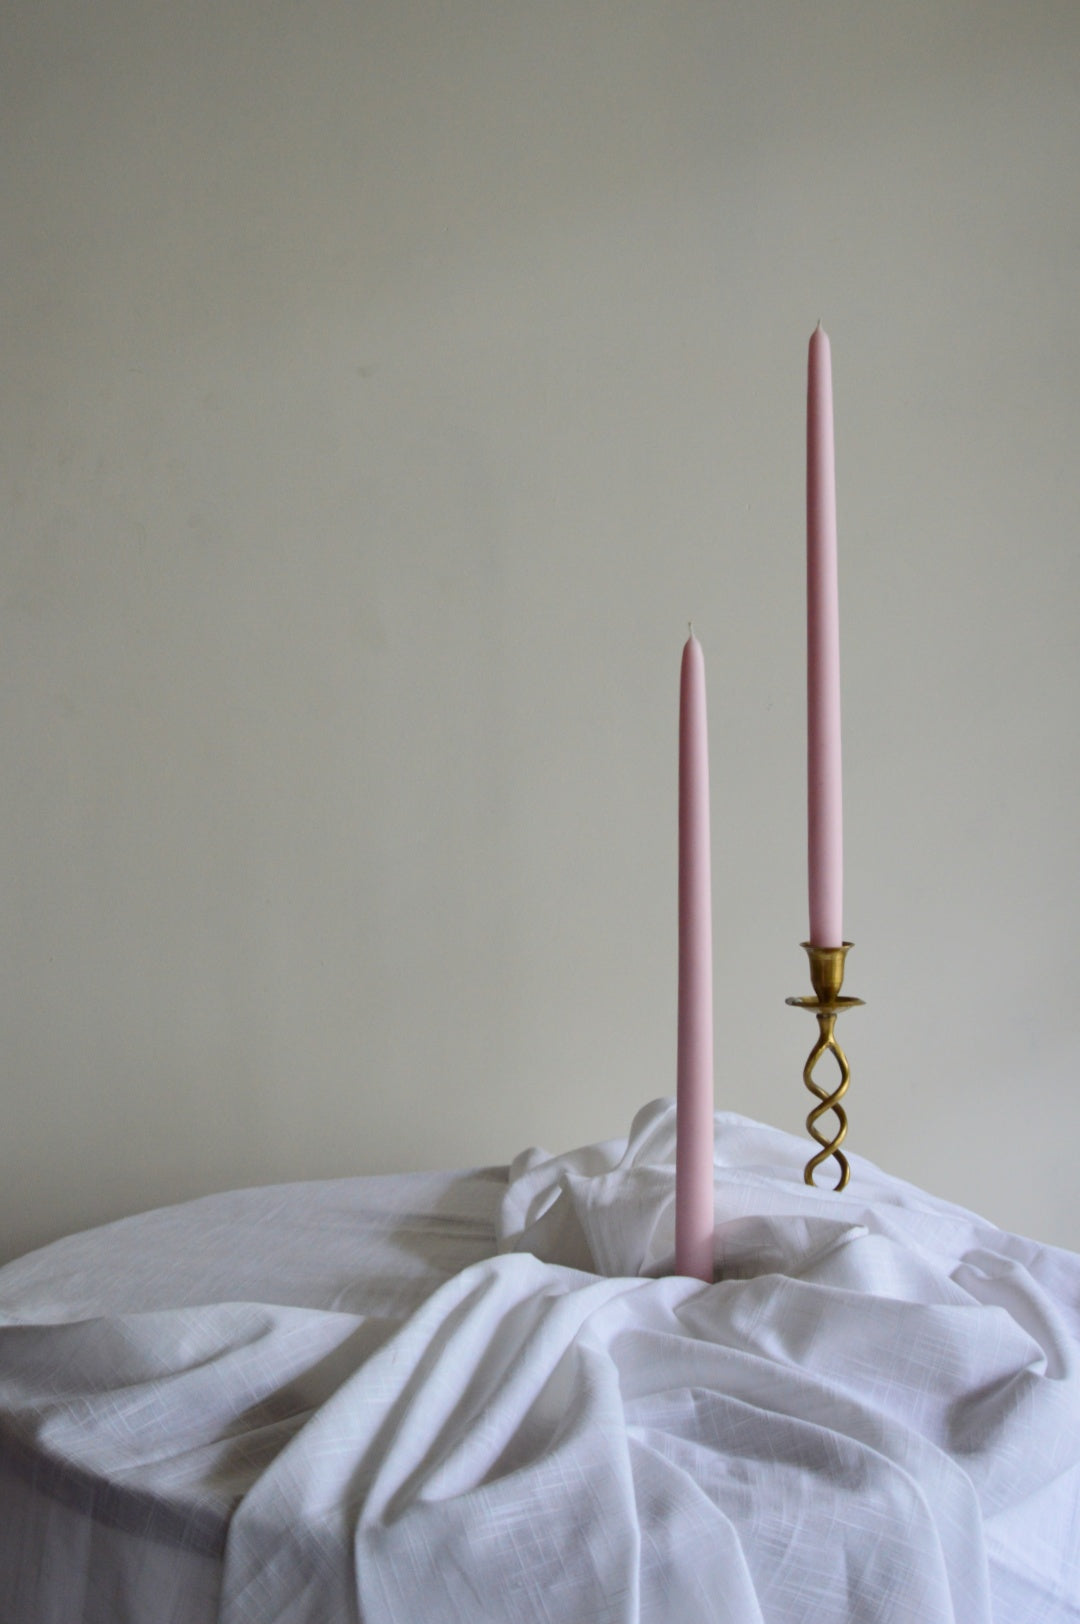 17" Tall Tapers | Pastel Pink